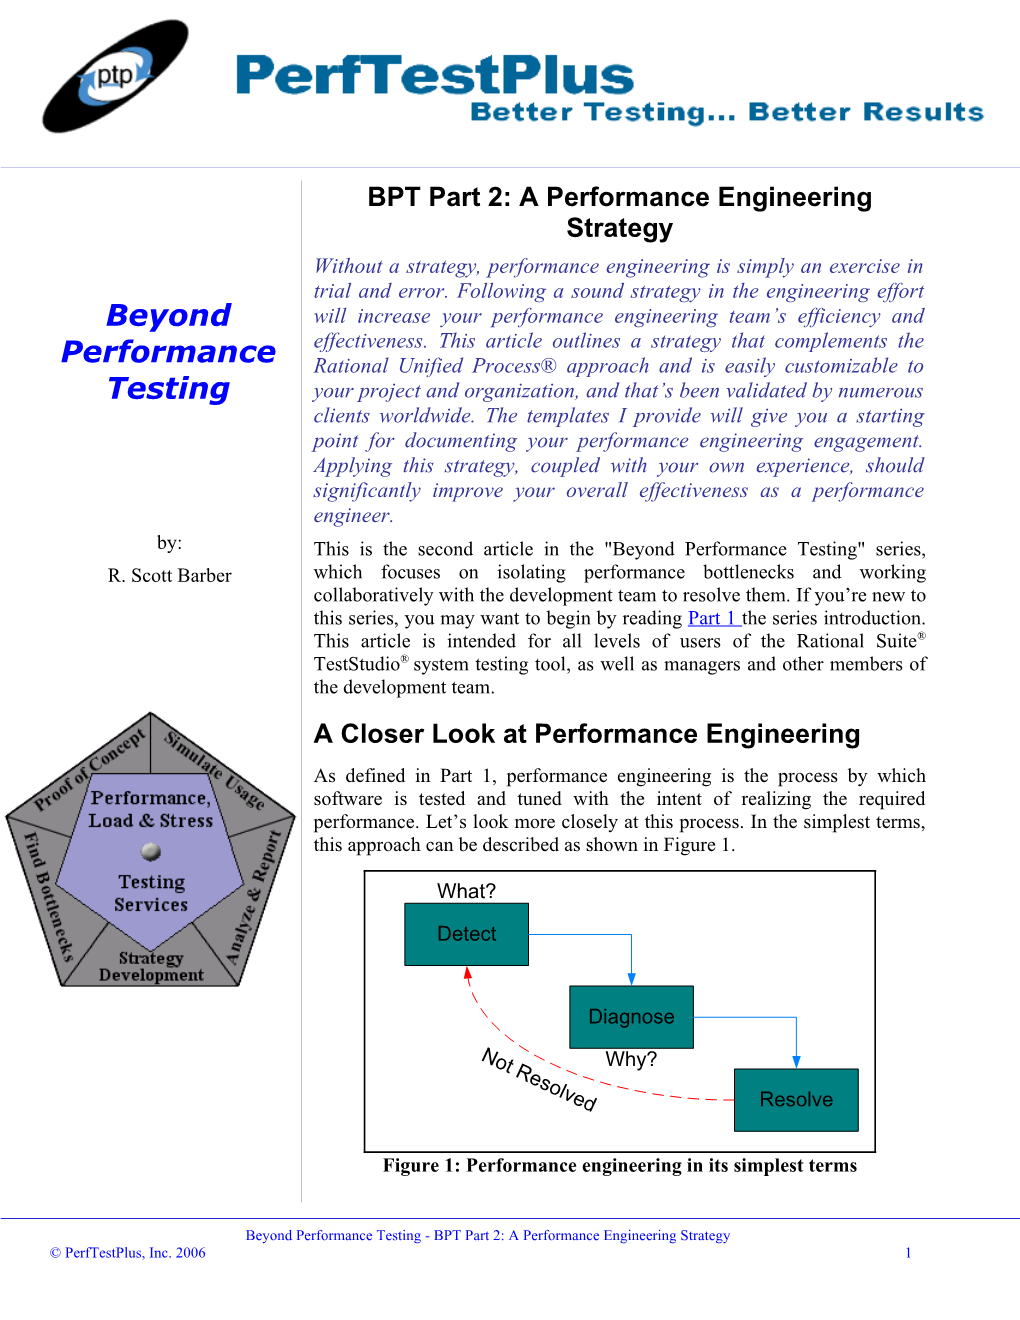 BPT Part 2: a Performance Engineering Strategy Without a Strategy, Performance Engineering Is Simply an Exercise in Trial and Error